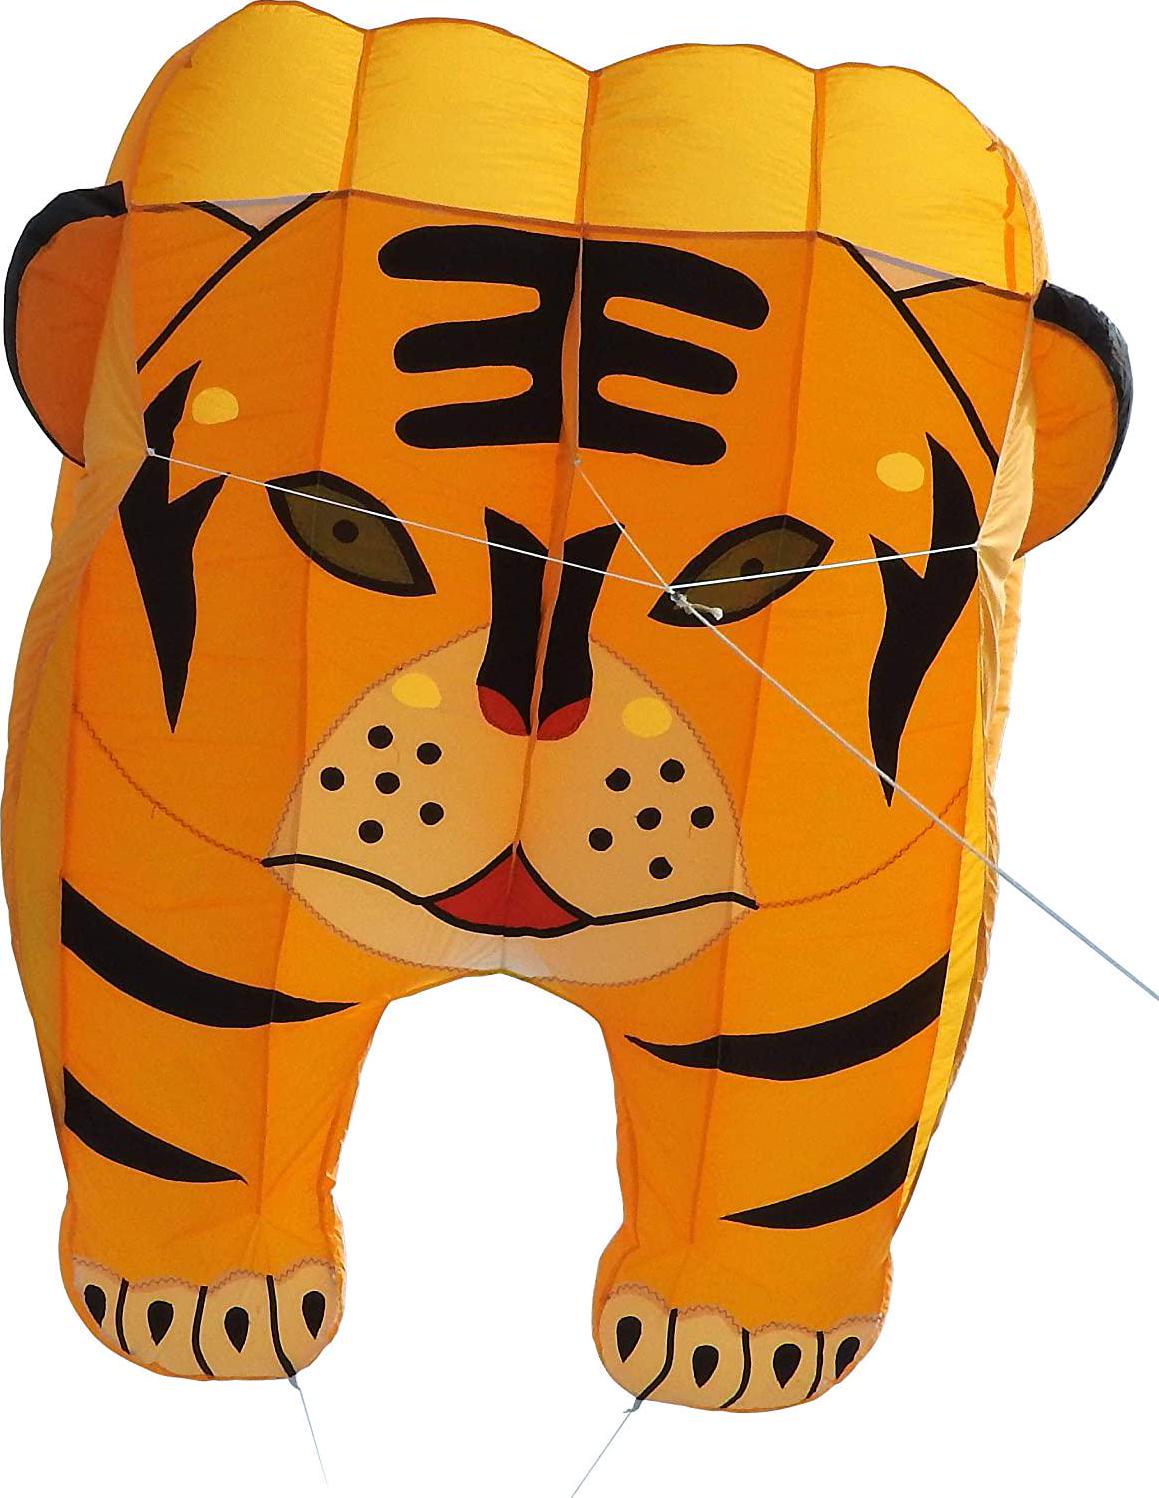 Fullfar, Fullfar Tiger 3D Kite for Adult, Soft Nylon Material Parafoil Kite for Kids. Easy to Fly 244×39 inch with Kite String and Backpack, Perfect Kite for The Beach or Park.